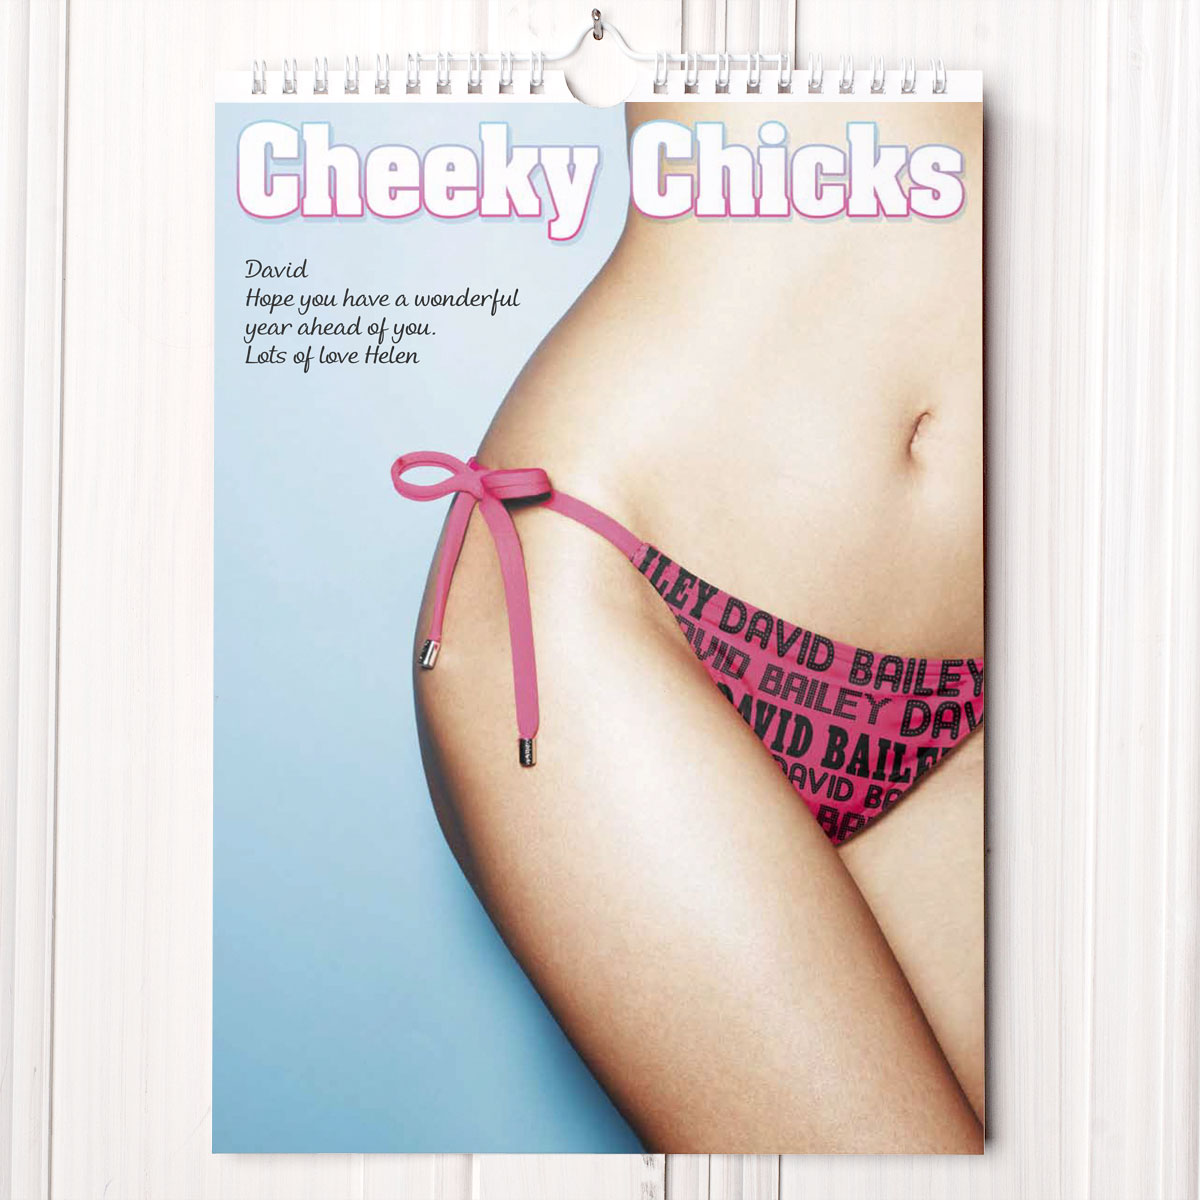 Personalised Cheeky Chicks Calendar - New Edition